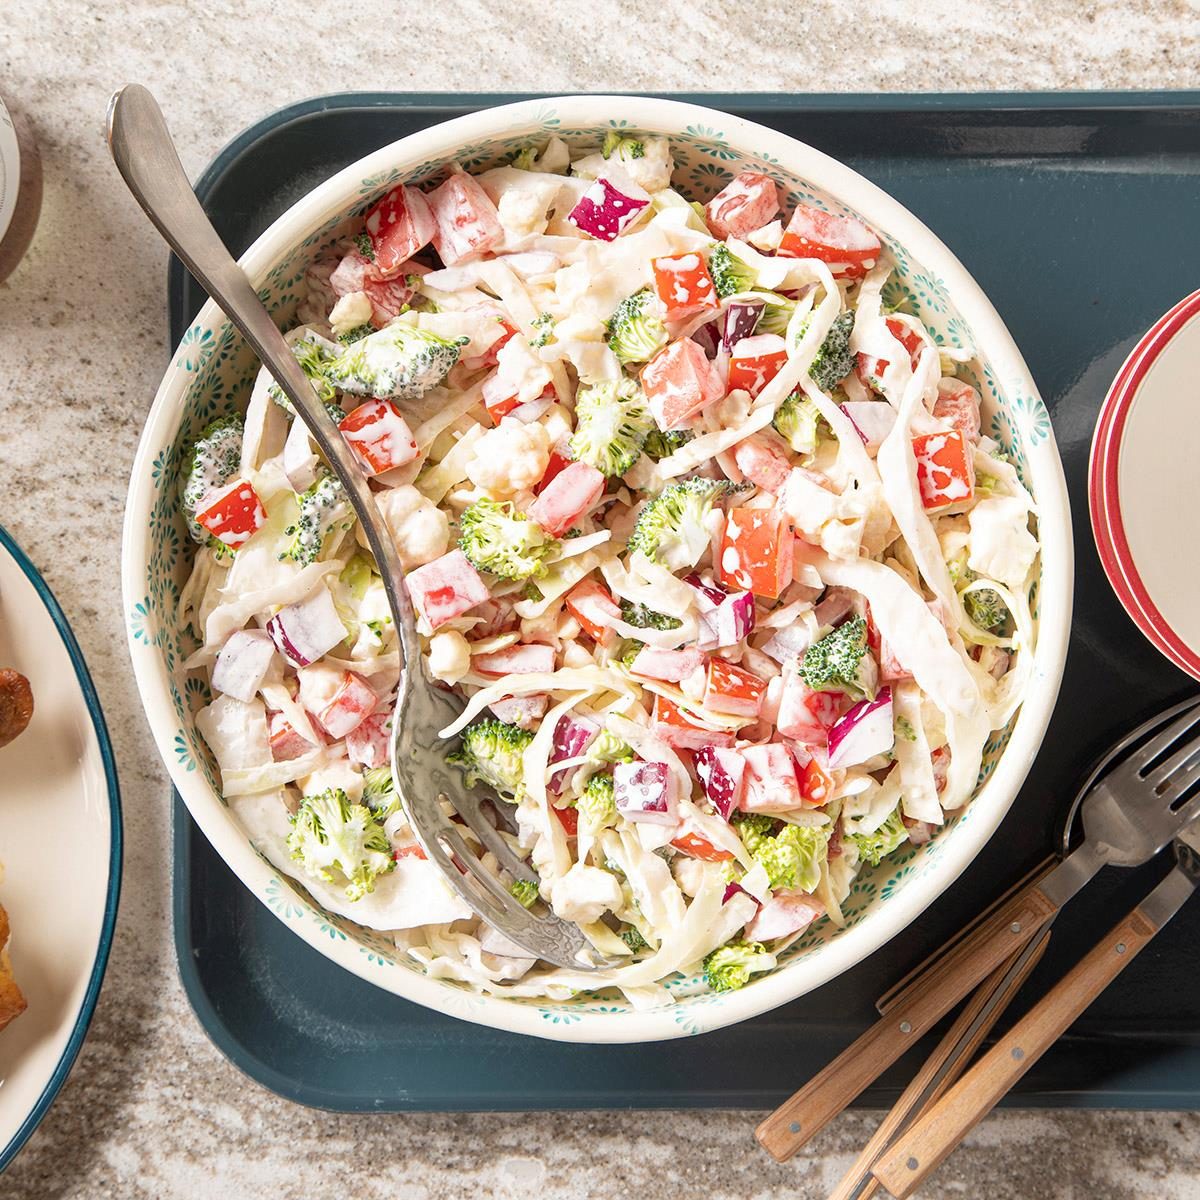 Vegetable Slaw Recipe: How to Make It